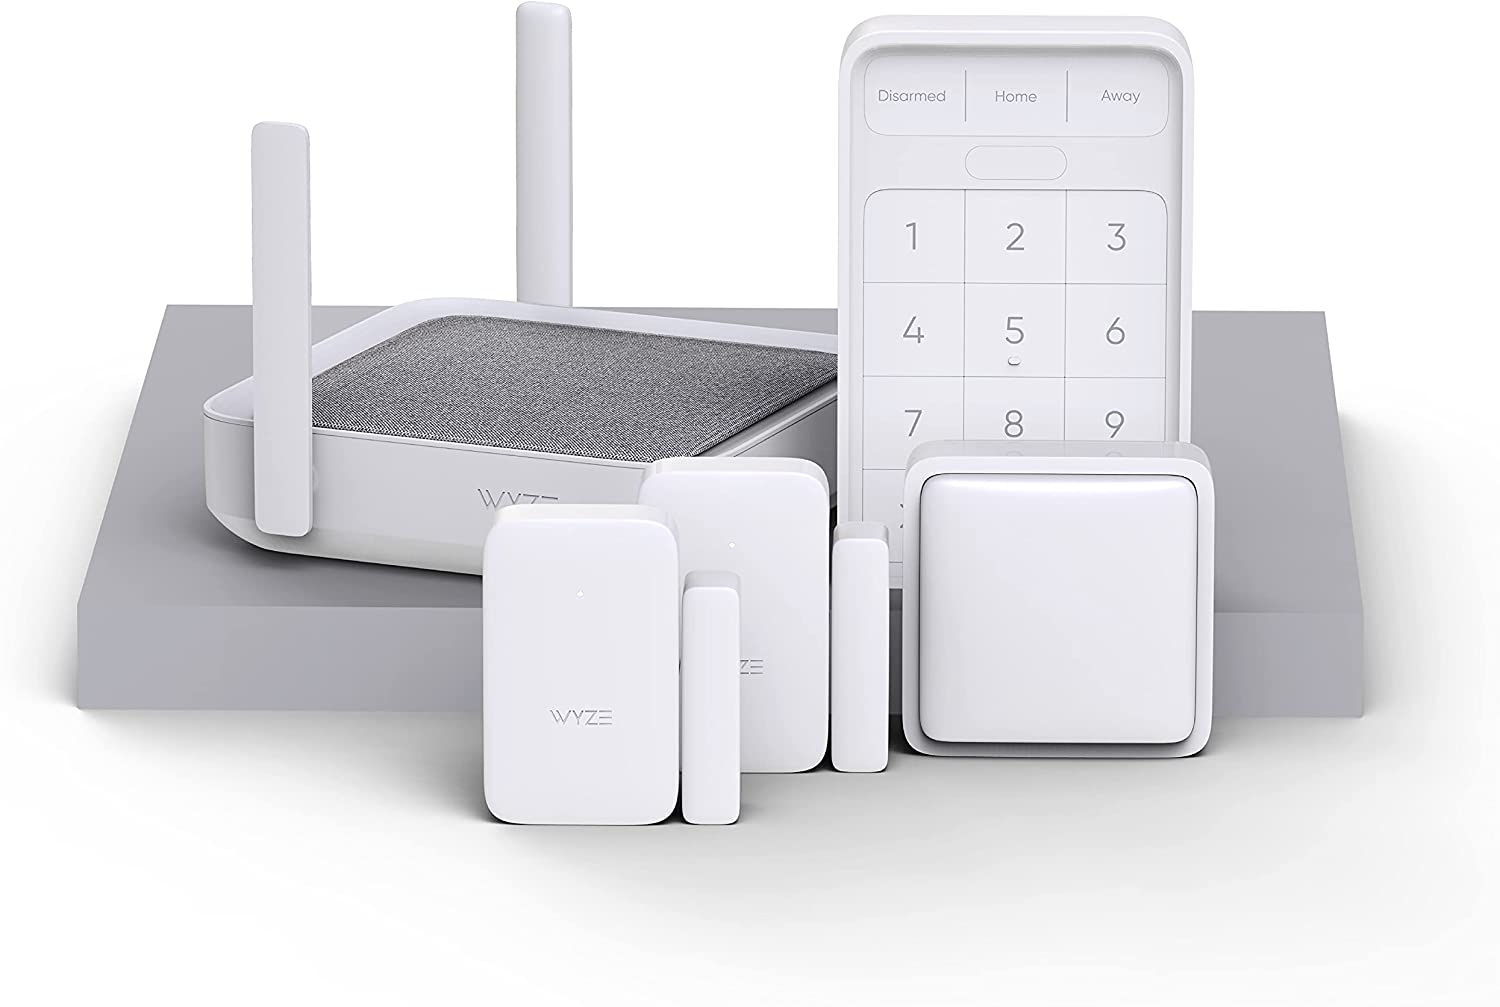 Wyze Home Security System Core Kit $50 $49.98